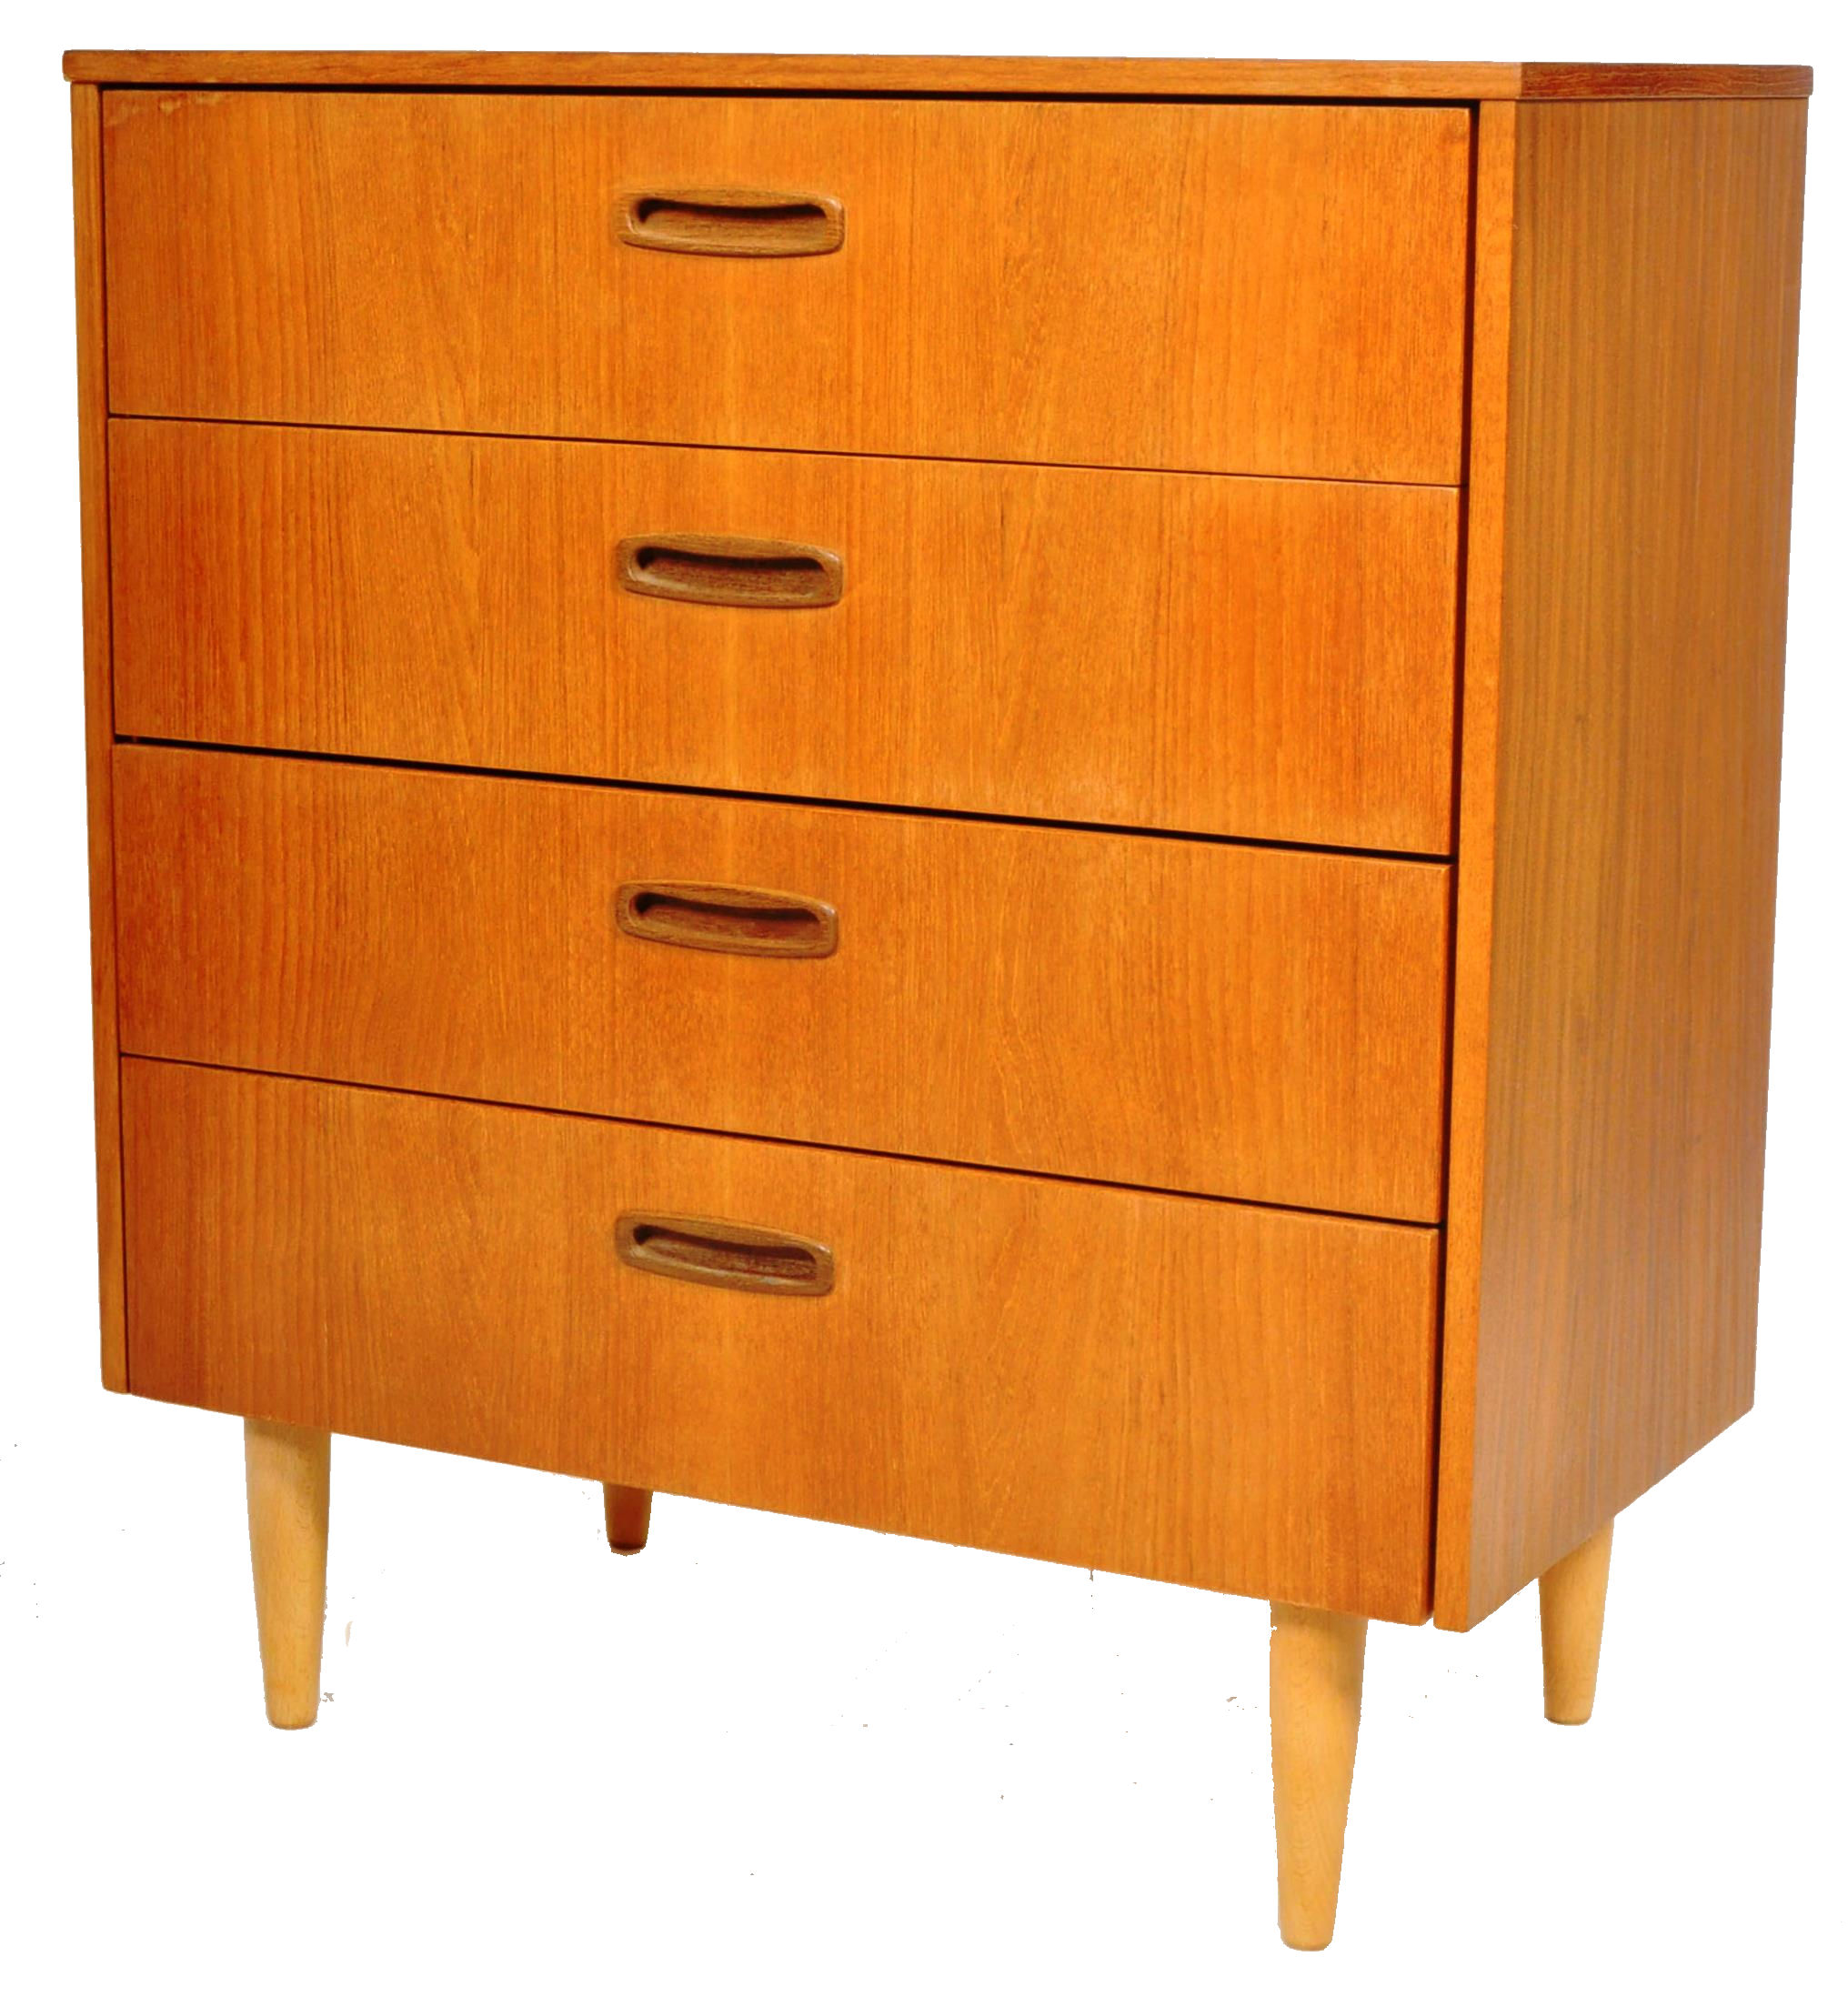 JENTIQUE - MID 20TH CENTURY TEAK CHEST OF DRAWERS